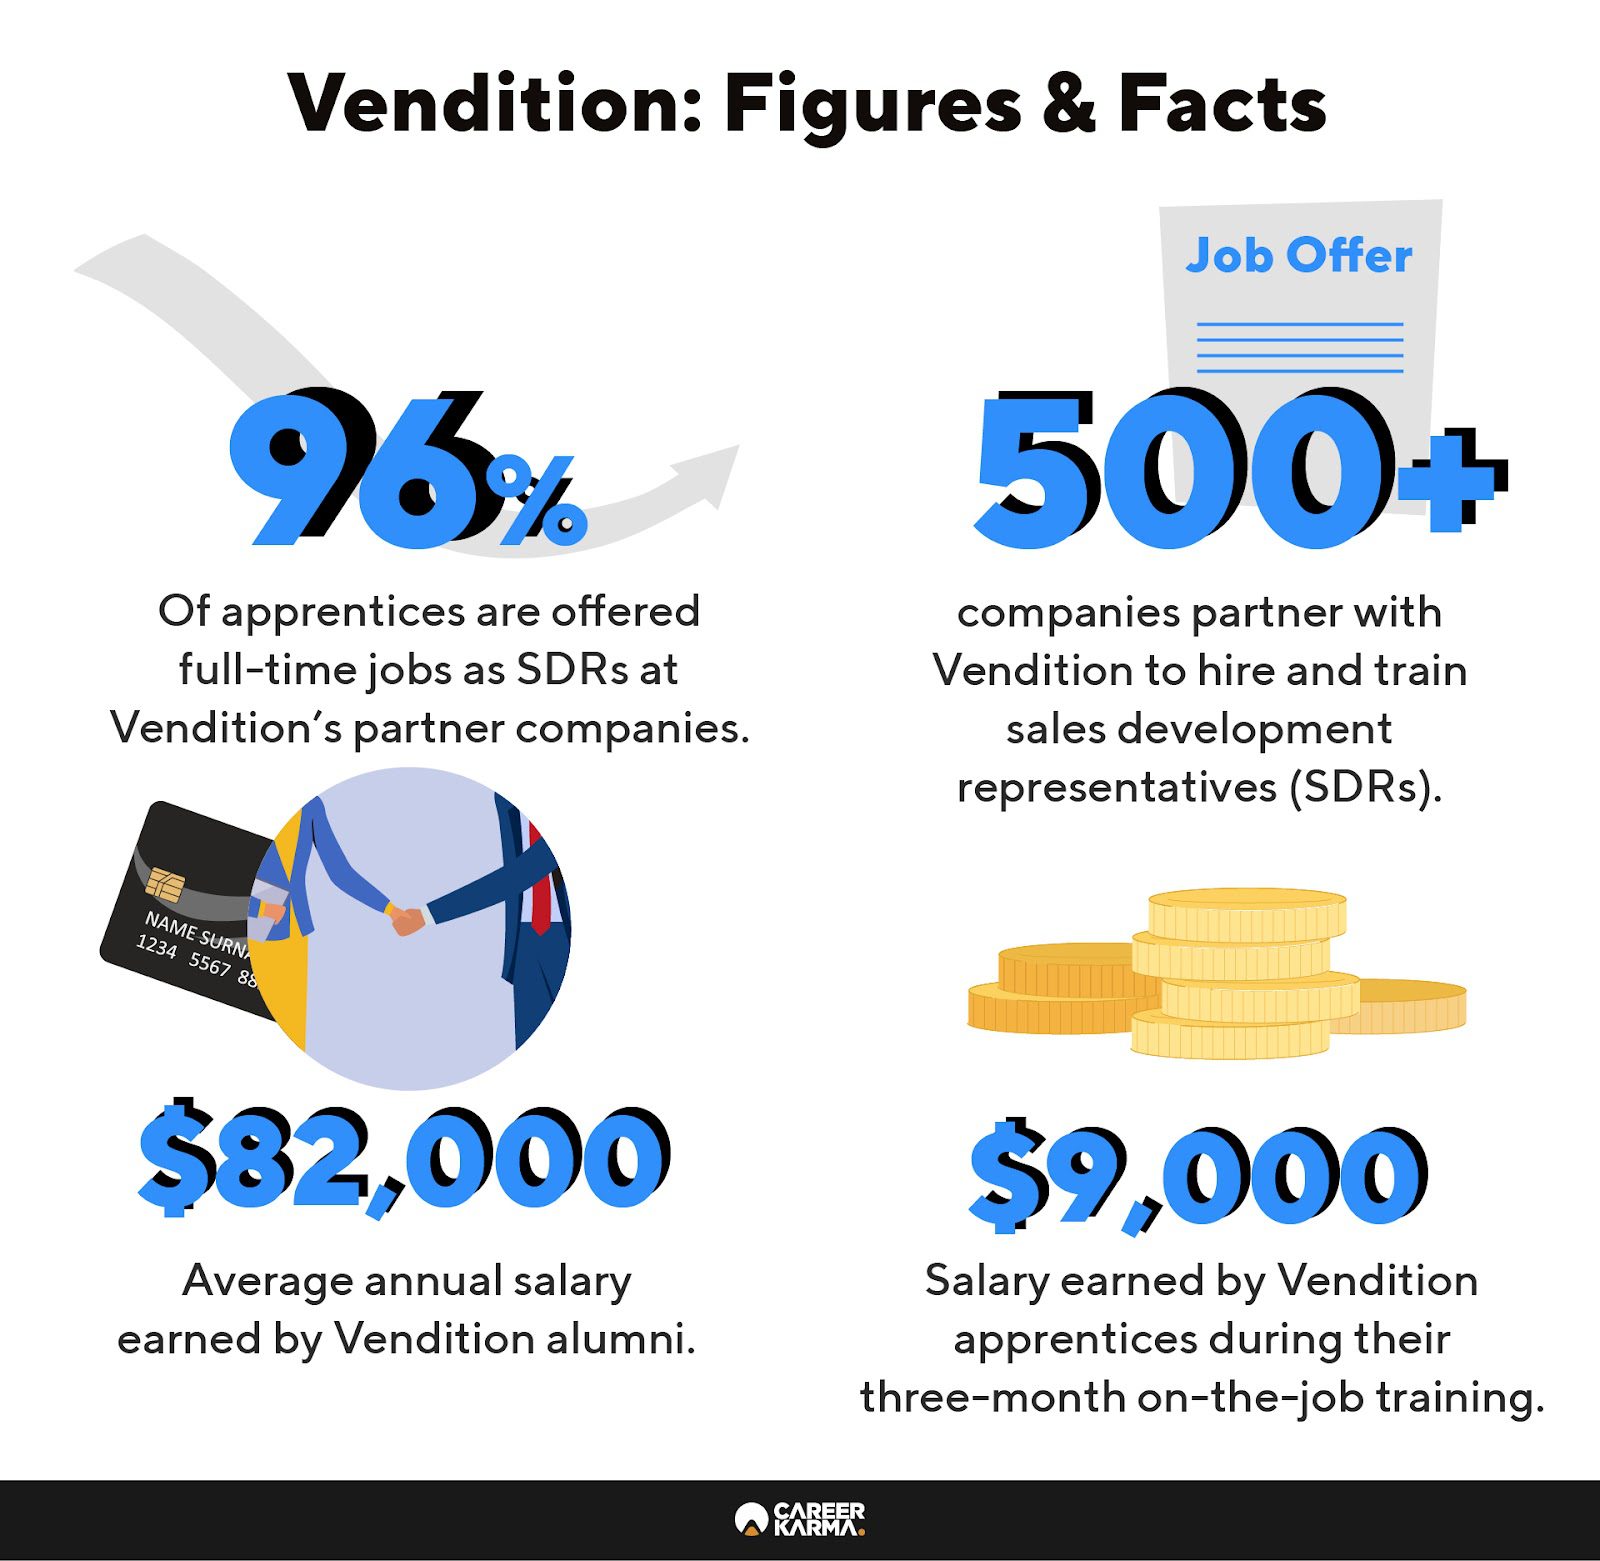 An infographic featuring Vendition’s outcomes figures